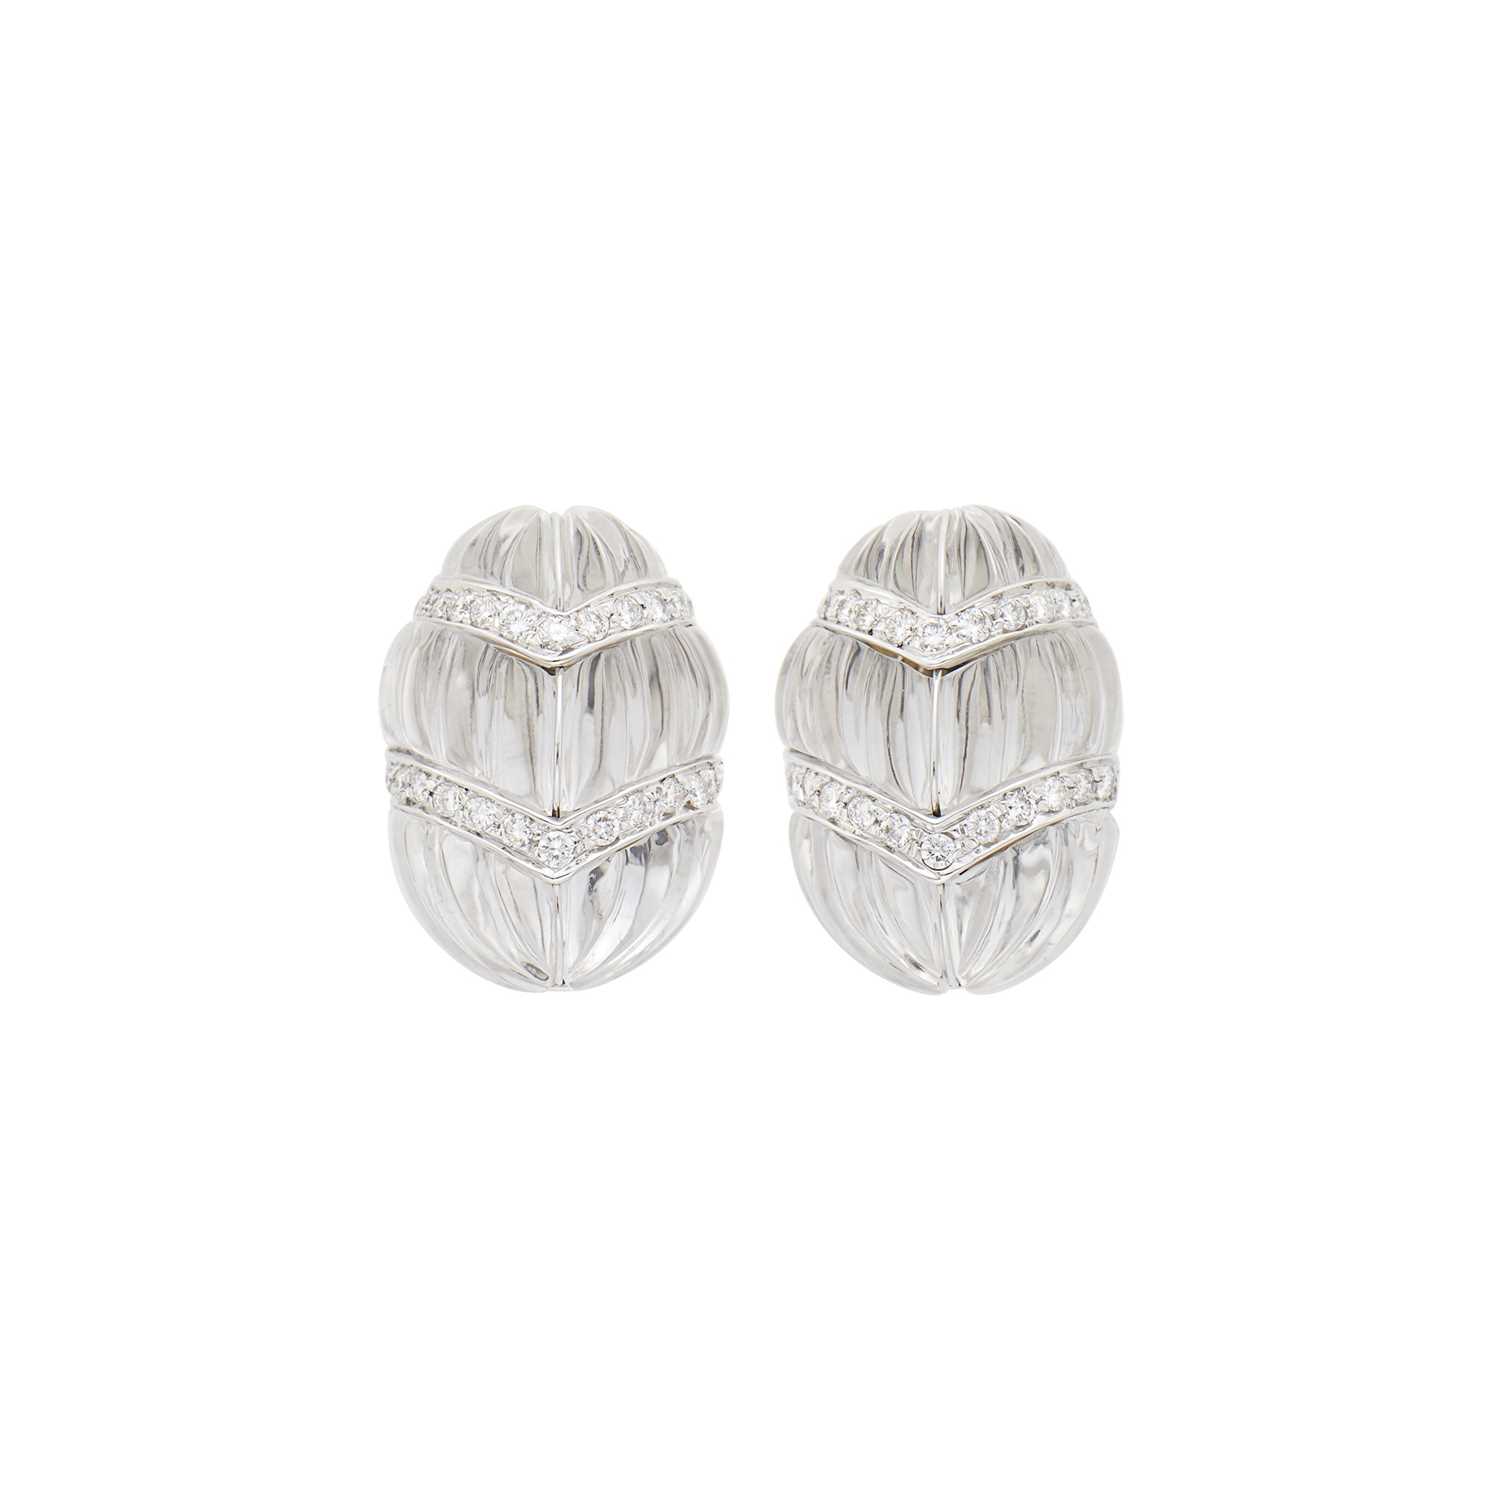 Lot 1049 - Pair of White Gold, Carved Rock Crystal and Diamond Earclips